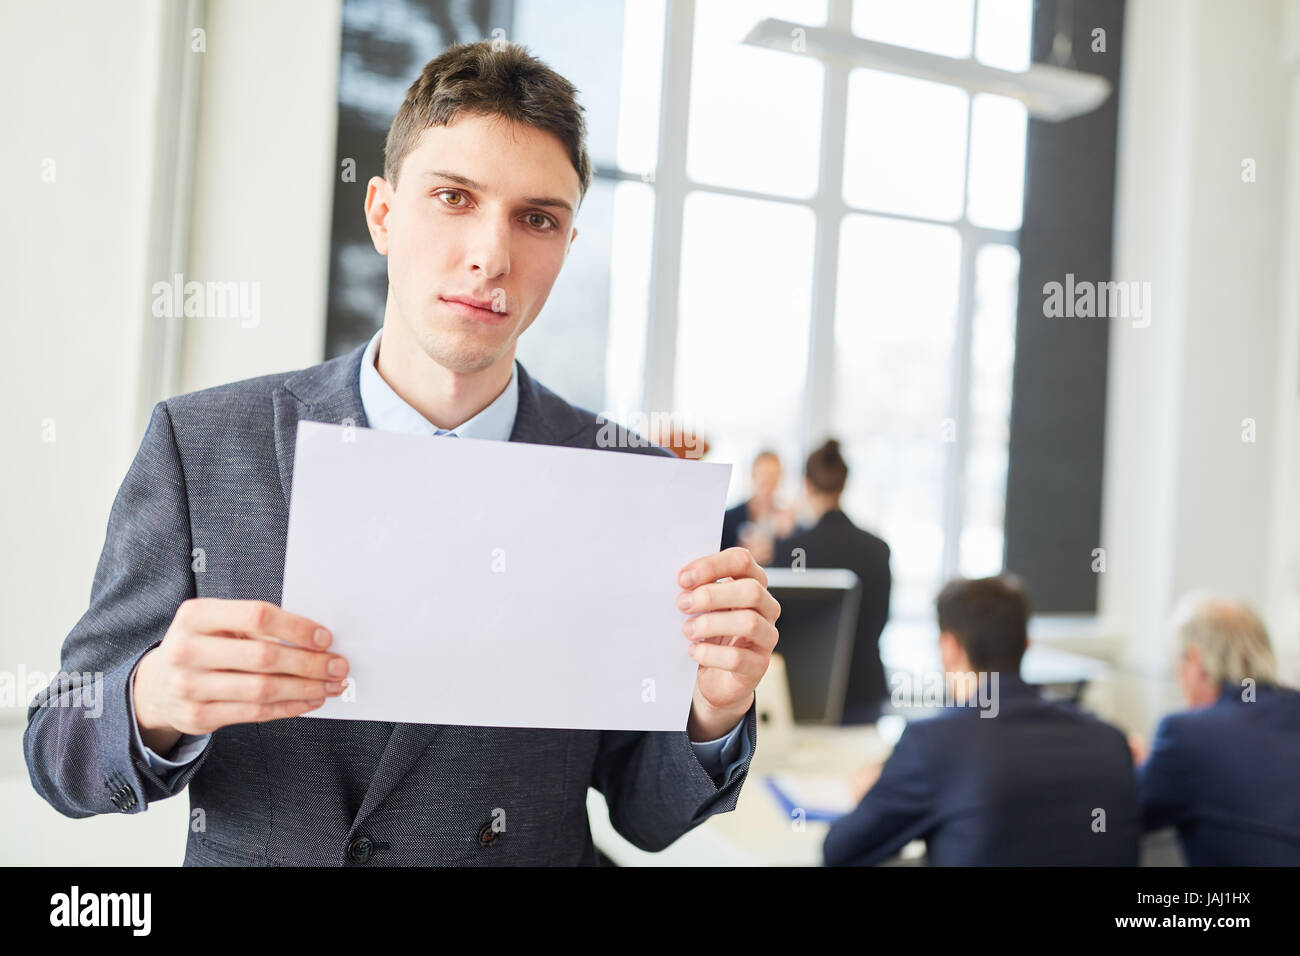 Serious man as candidate holds blank sign in business office Stock Photo